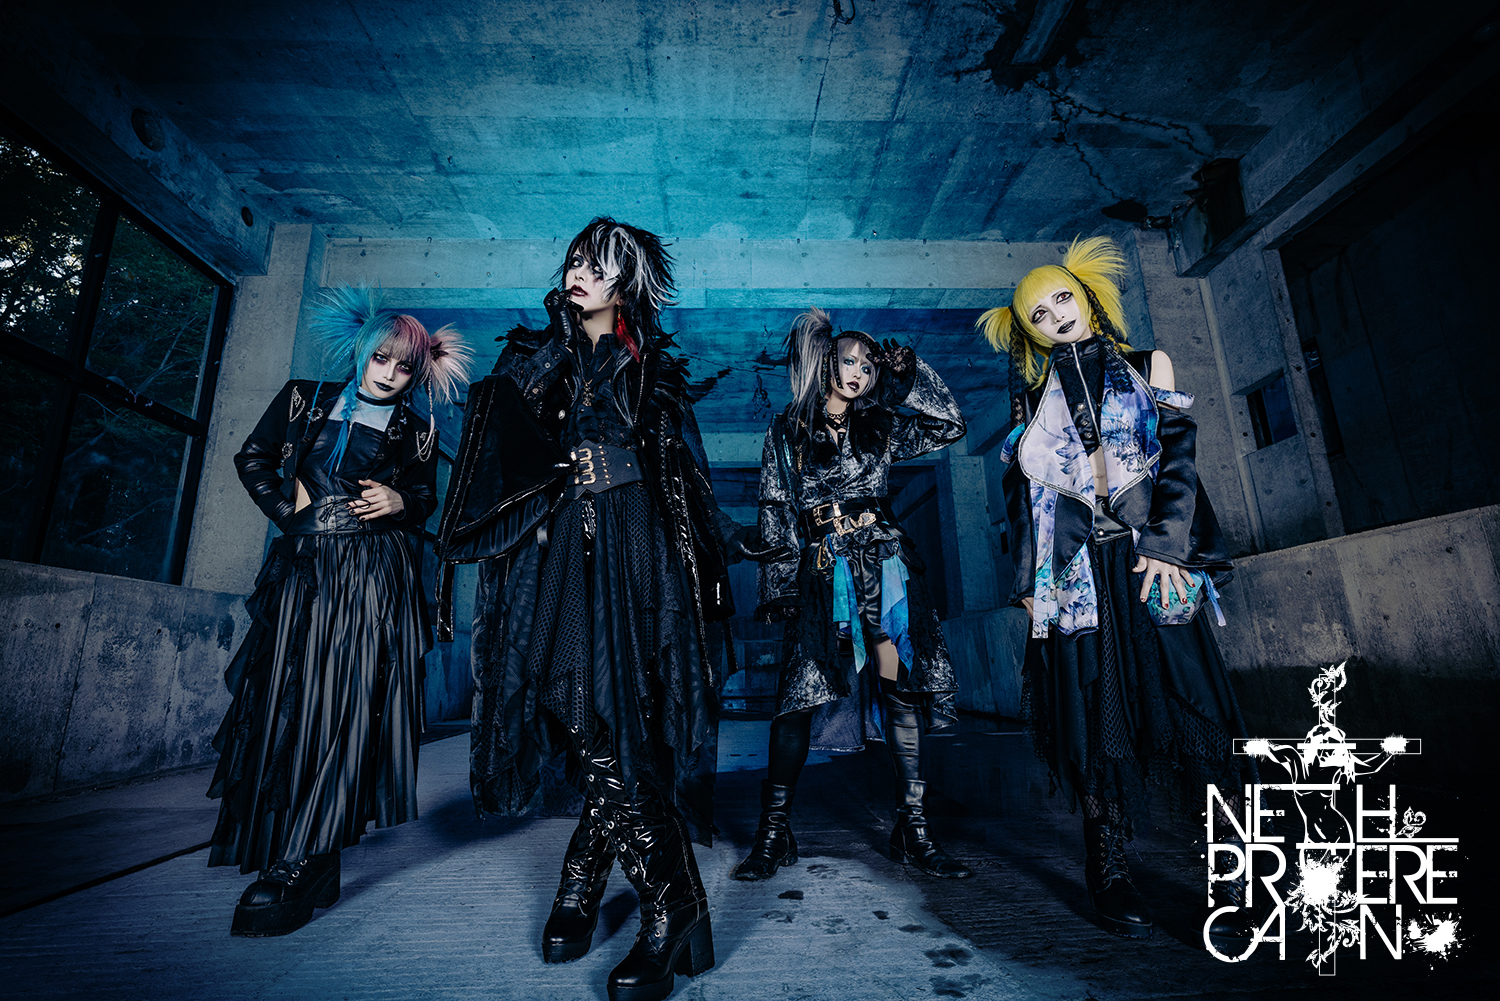 NETH PRIERE CAIN official website